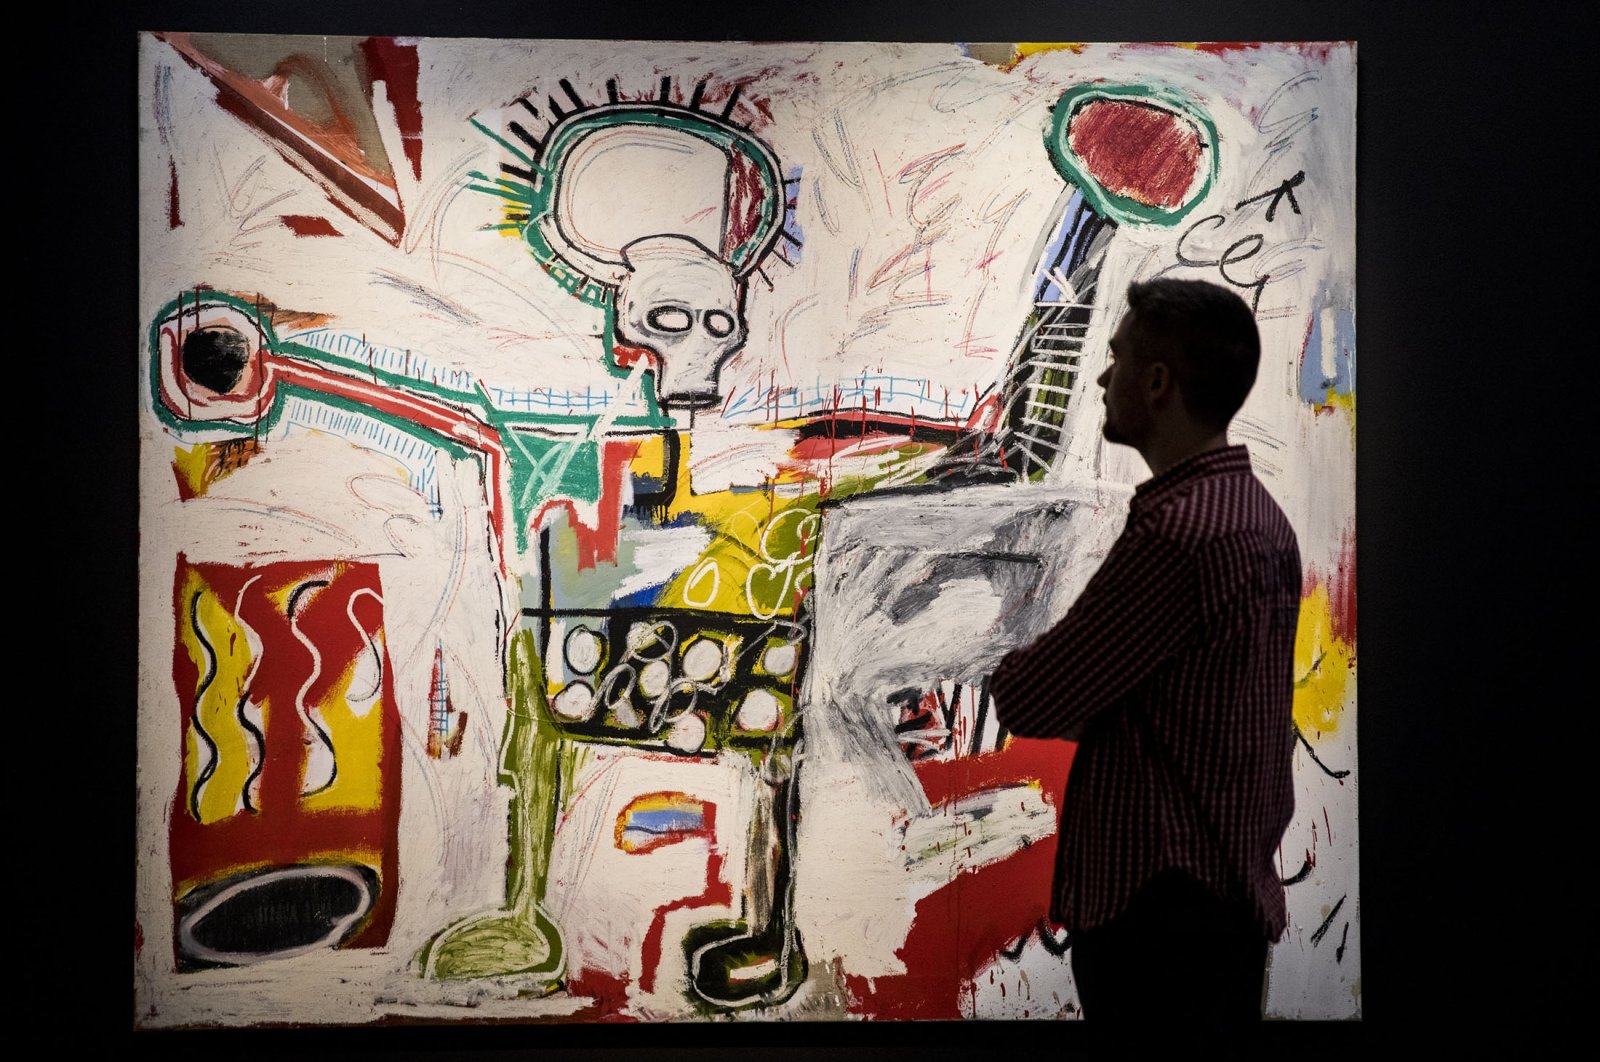 A person looks at an untitled 1982 artwork, courtesy of the Museum Boijmans Van Beuningen, Rotterdam on show in London, U.K., Sept 19, 2017. (Getty Images)